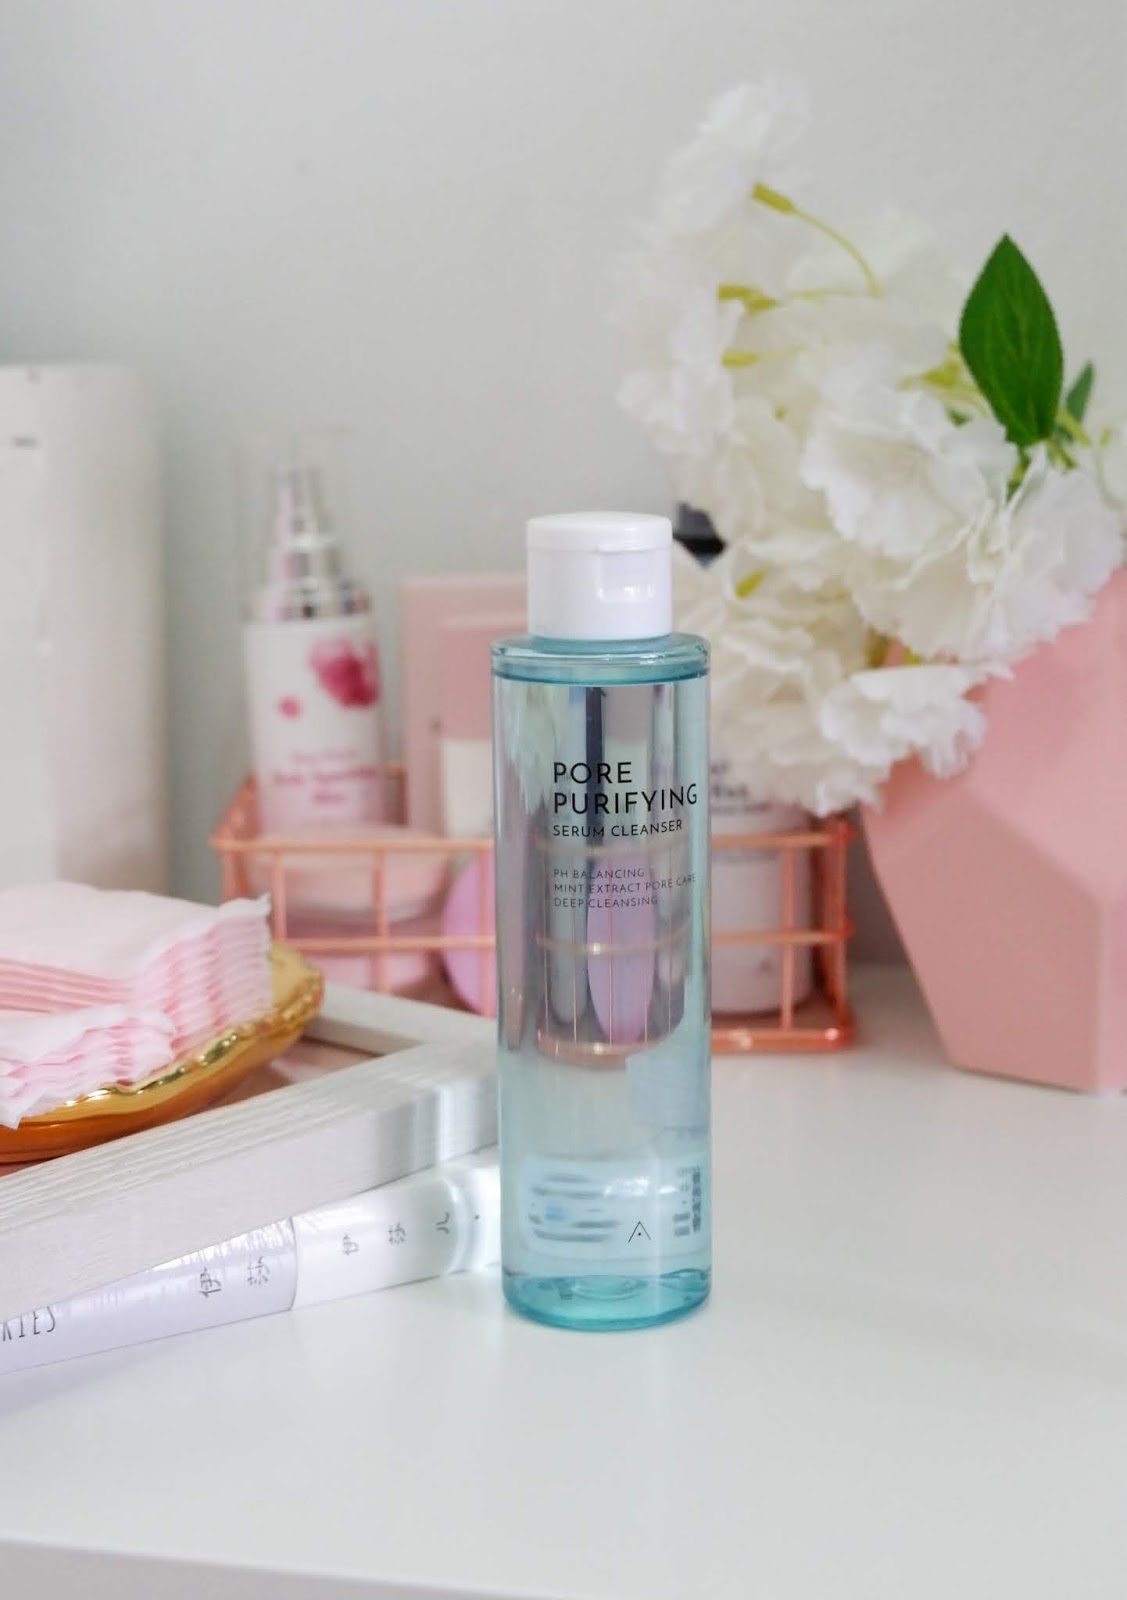 ALTHEA PORE PURIFYING SERUM CLEANSER REVIEW